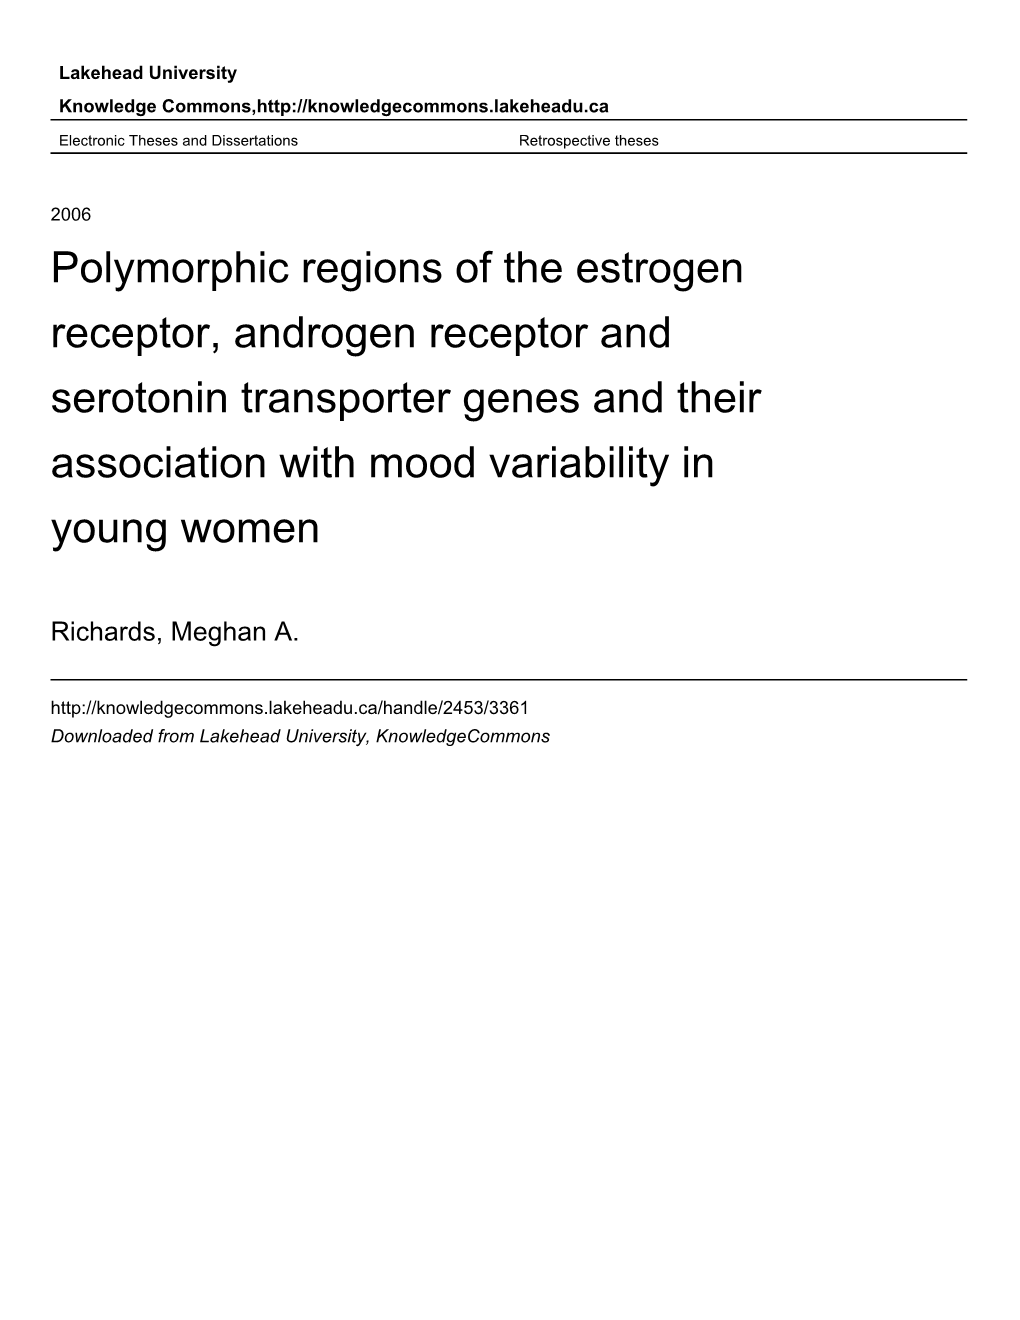 Polymorphic Regions of the Estrogen Receptor, Androgen Receptor and Serotonin Transporter Genes and Their Association with Mood Variability in Young Women